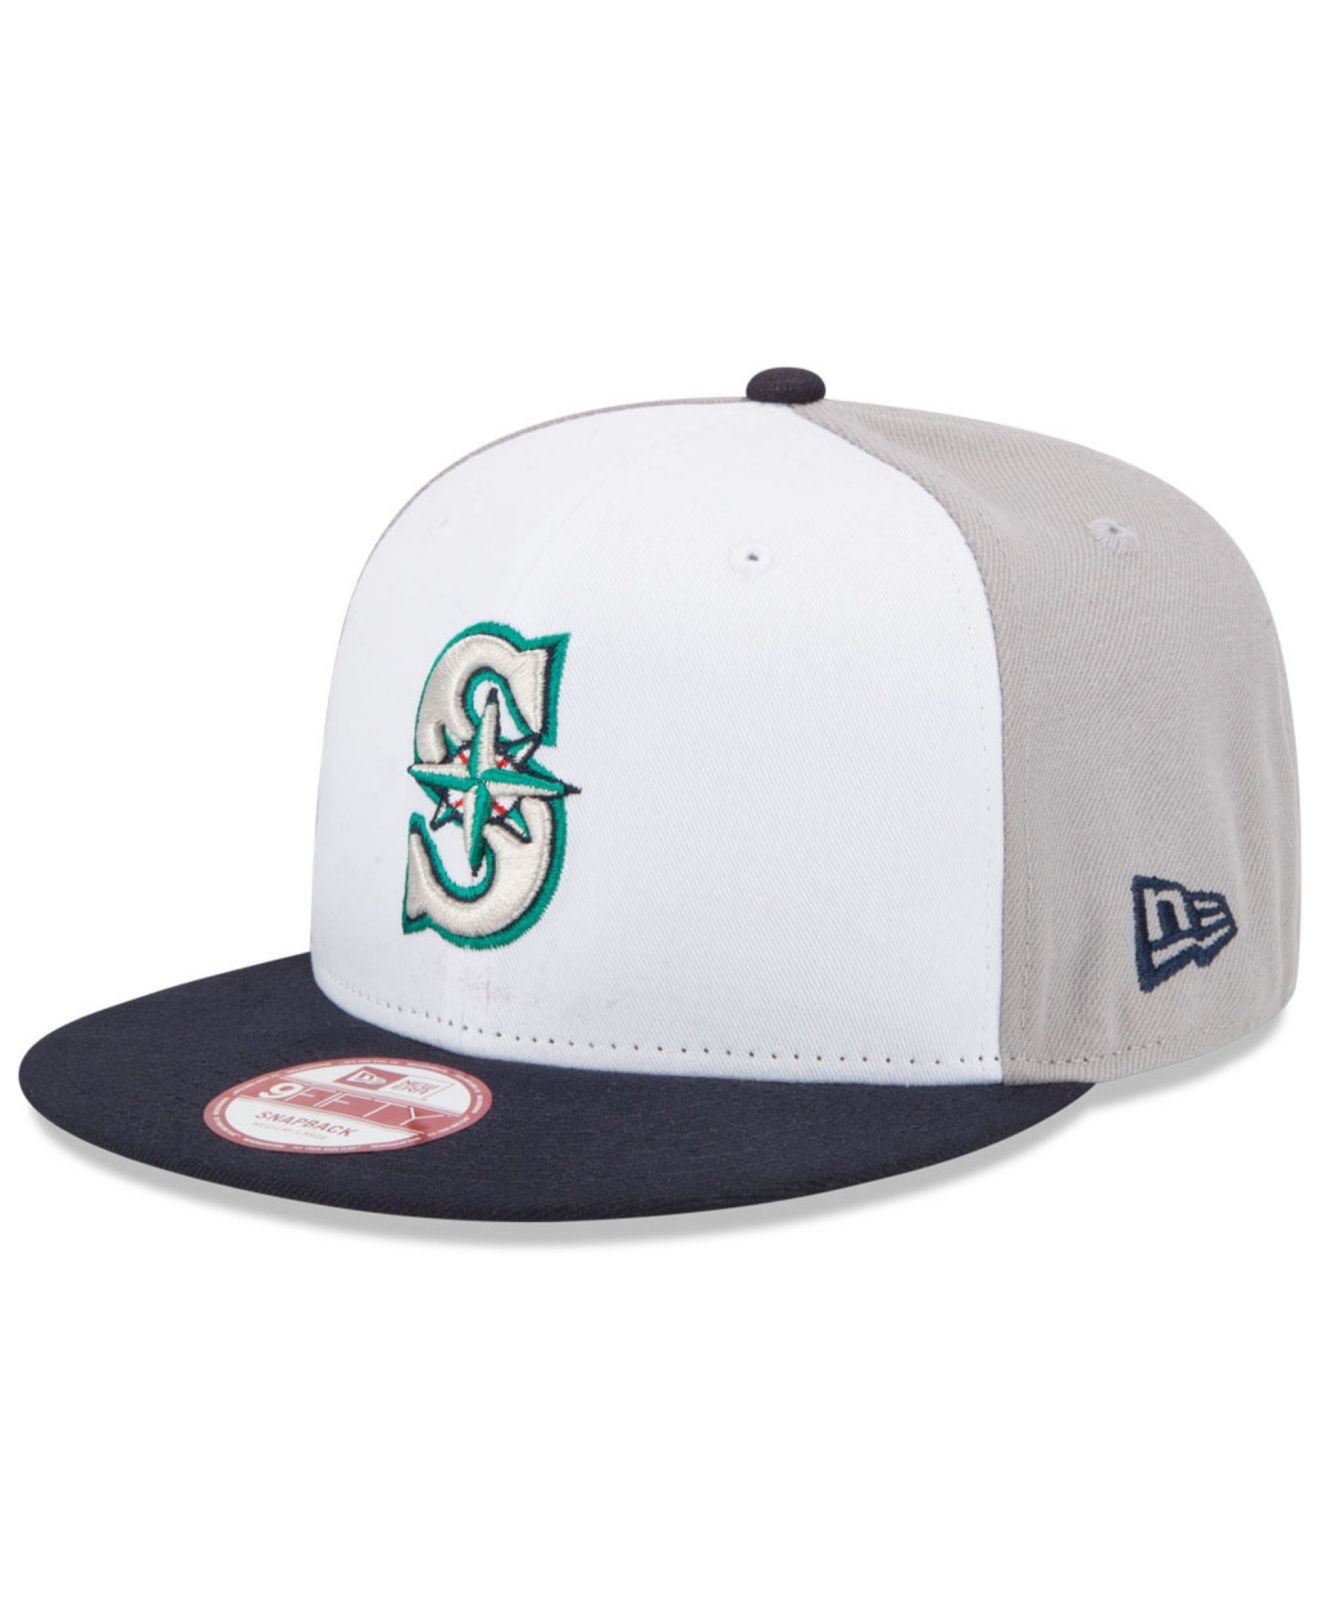 New Era Men's White and Royal Seattle Mariners Crest 9FIFTY Snapback Hat